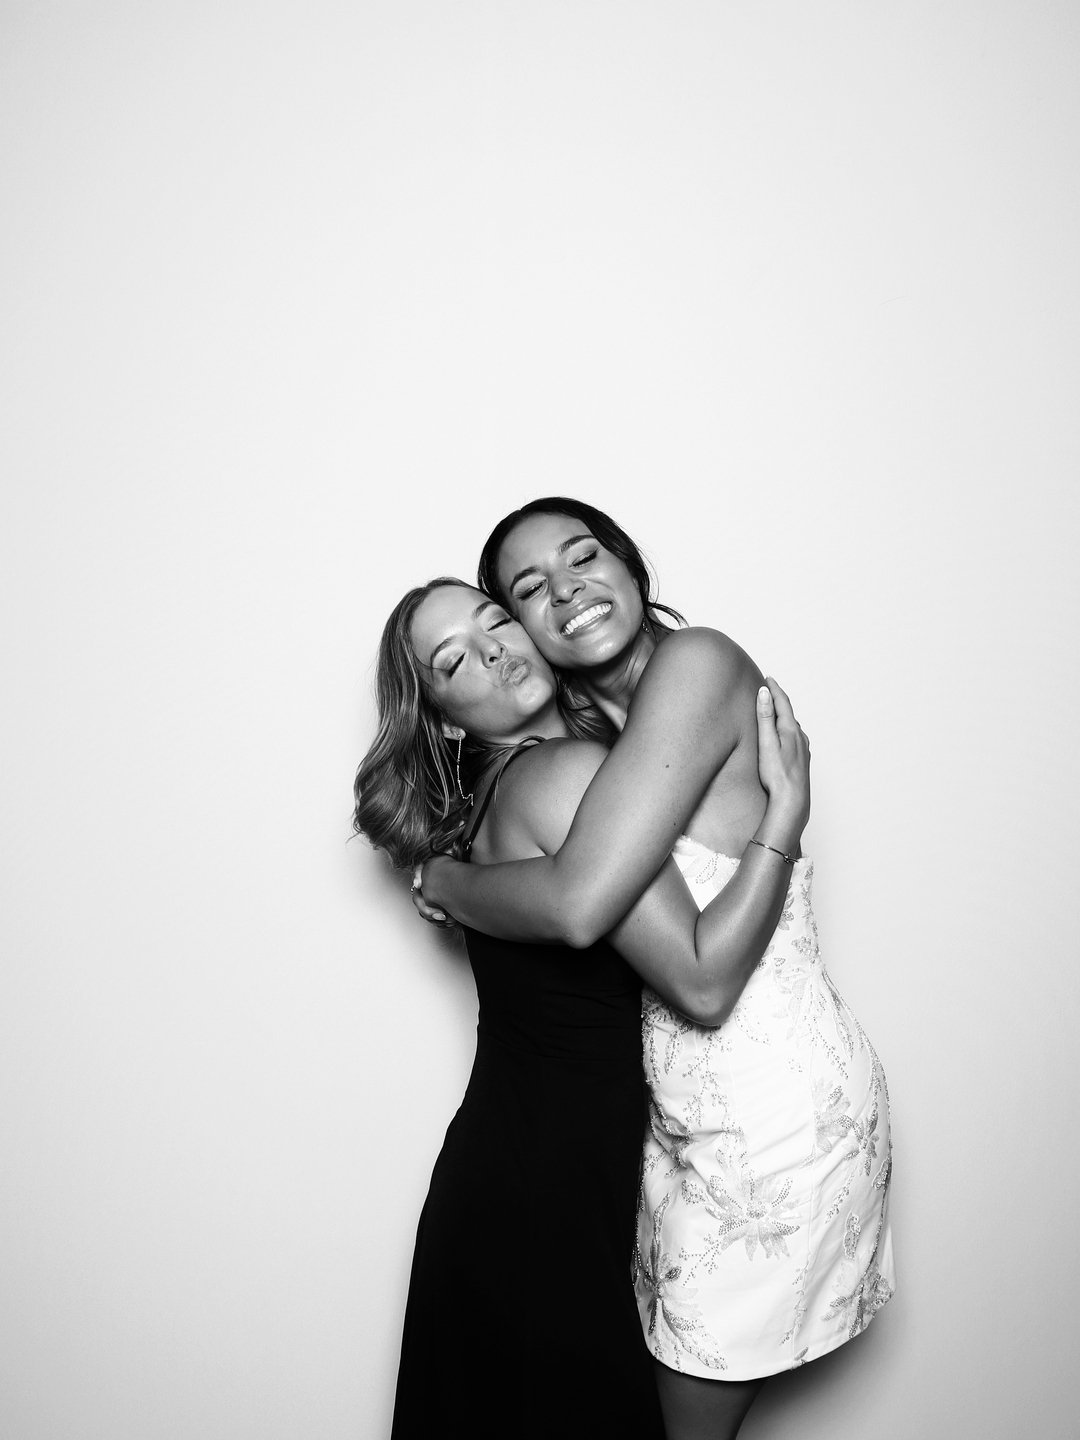 Pics with the bestie &amp; getting to replay those epic moments with sweet prints and gallery access? OK, BET! 

#blackandwhitephotobooth #weddinginspo #palmbeachphotobooth #glambooth #floridaglambooth #glamboothflorida